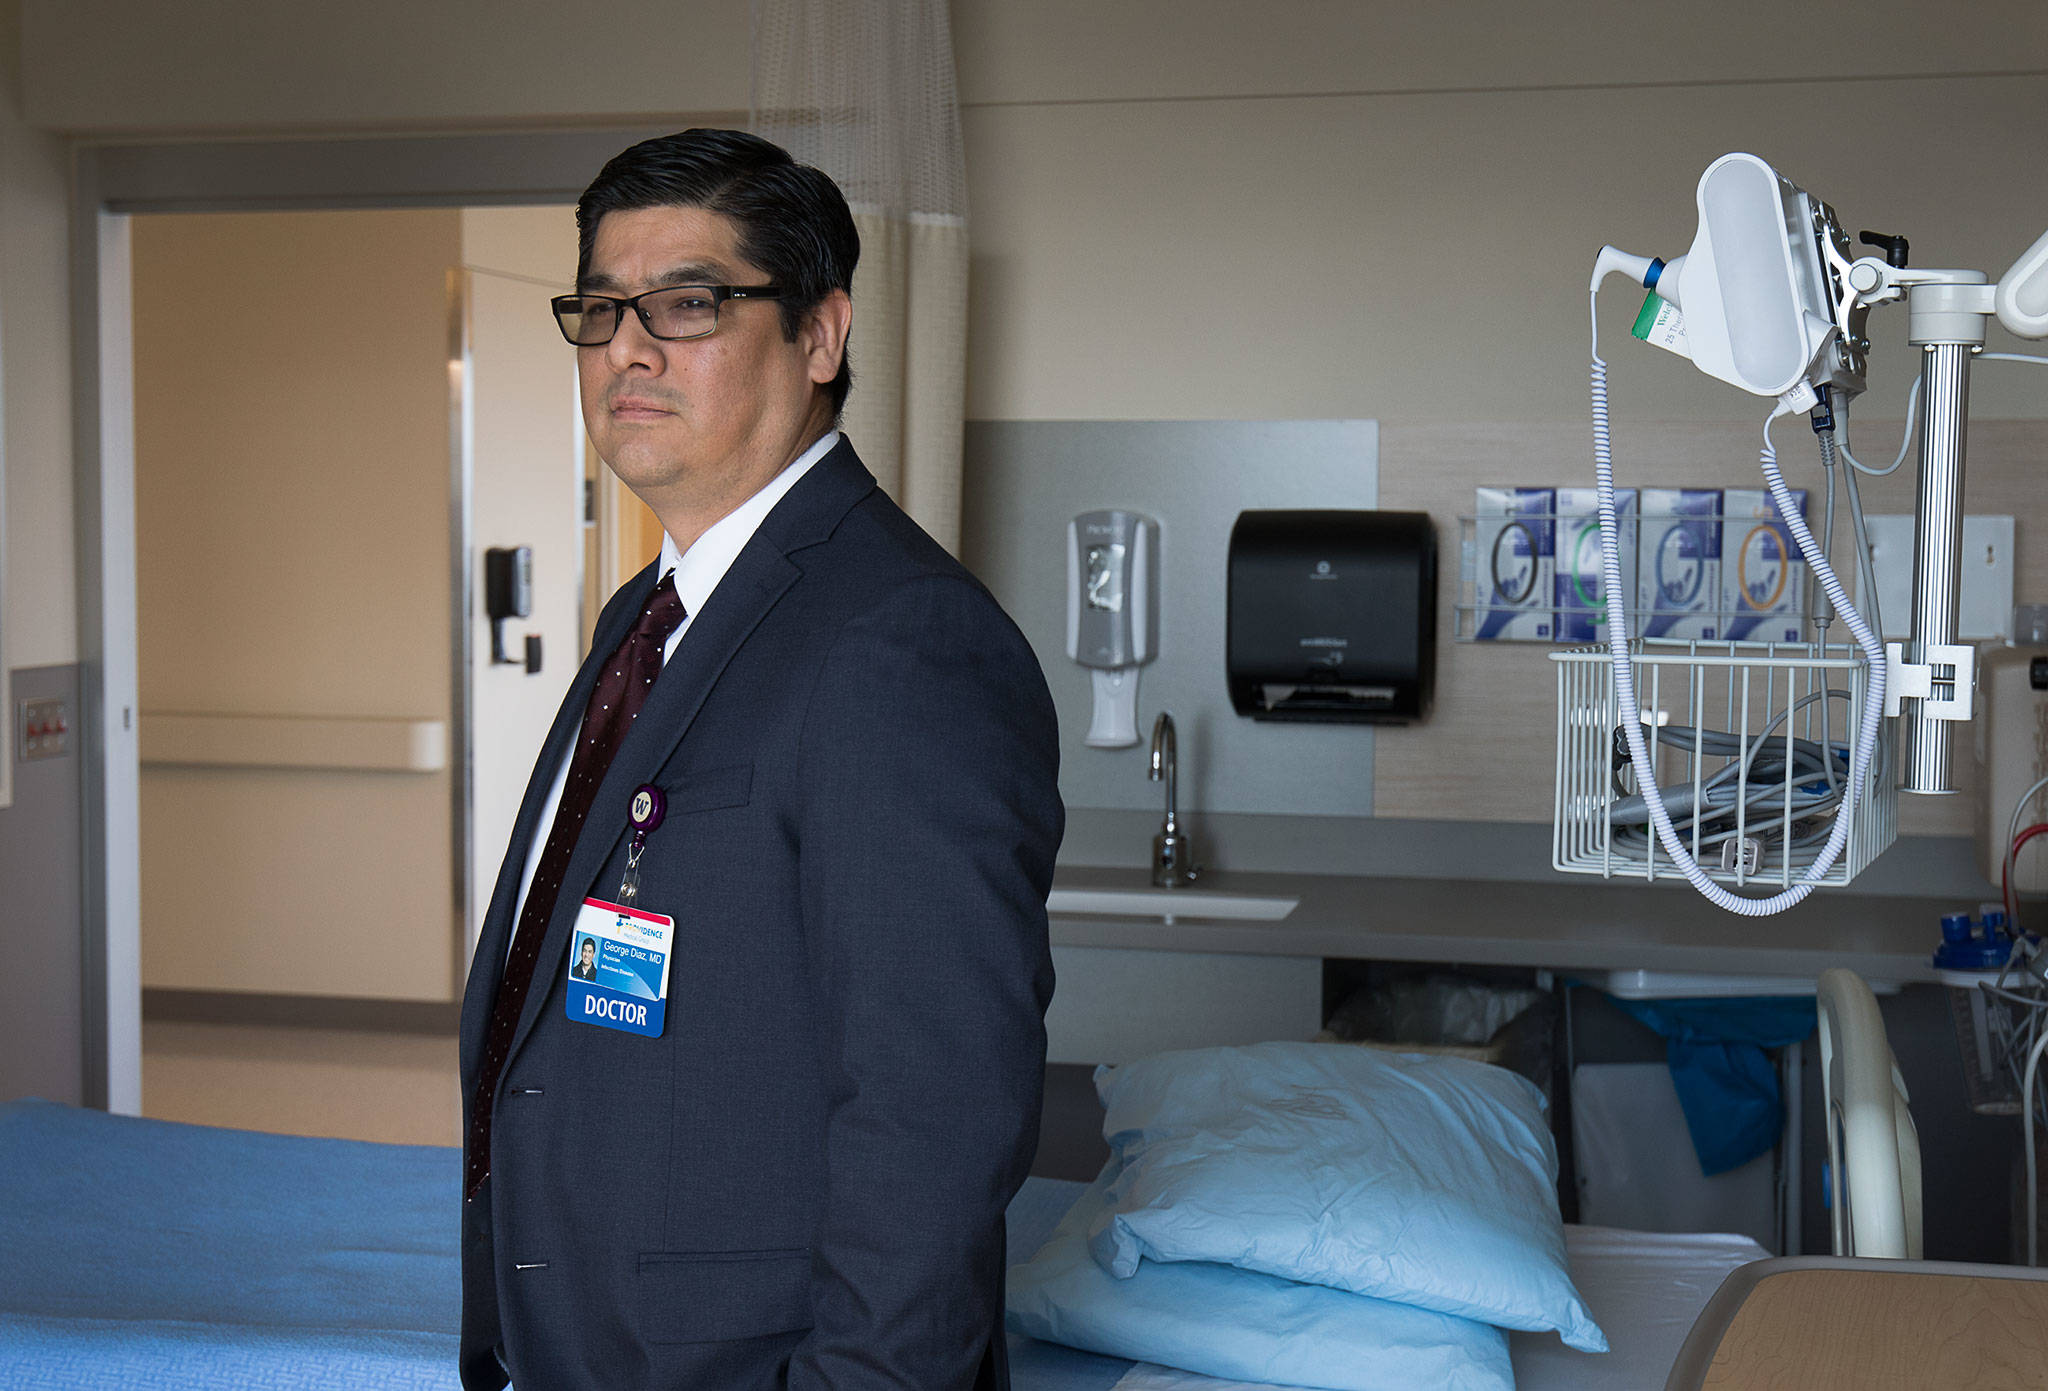 Providence Regional Medical Center’s Dr. George Diaz, who saw the first patient with COVID-19 to be brought to the hospital, in the newest wing of PRMC on Wednesday in Everett. (Andy Bronson / The Herald)